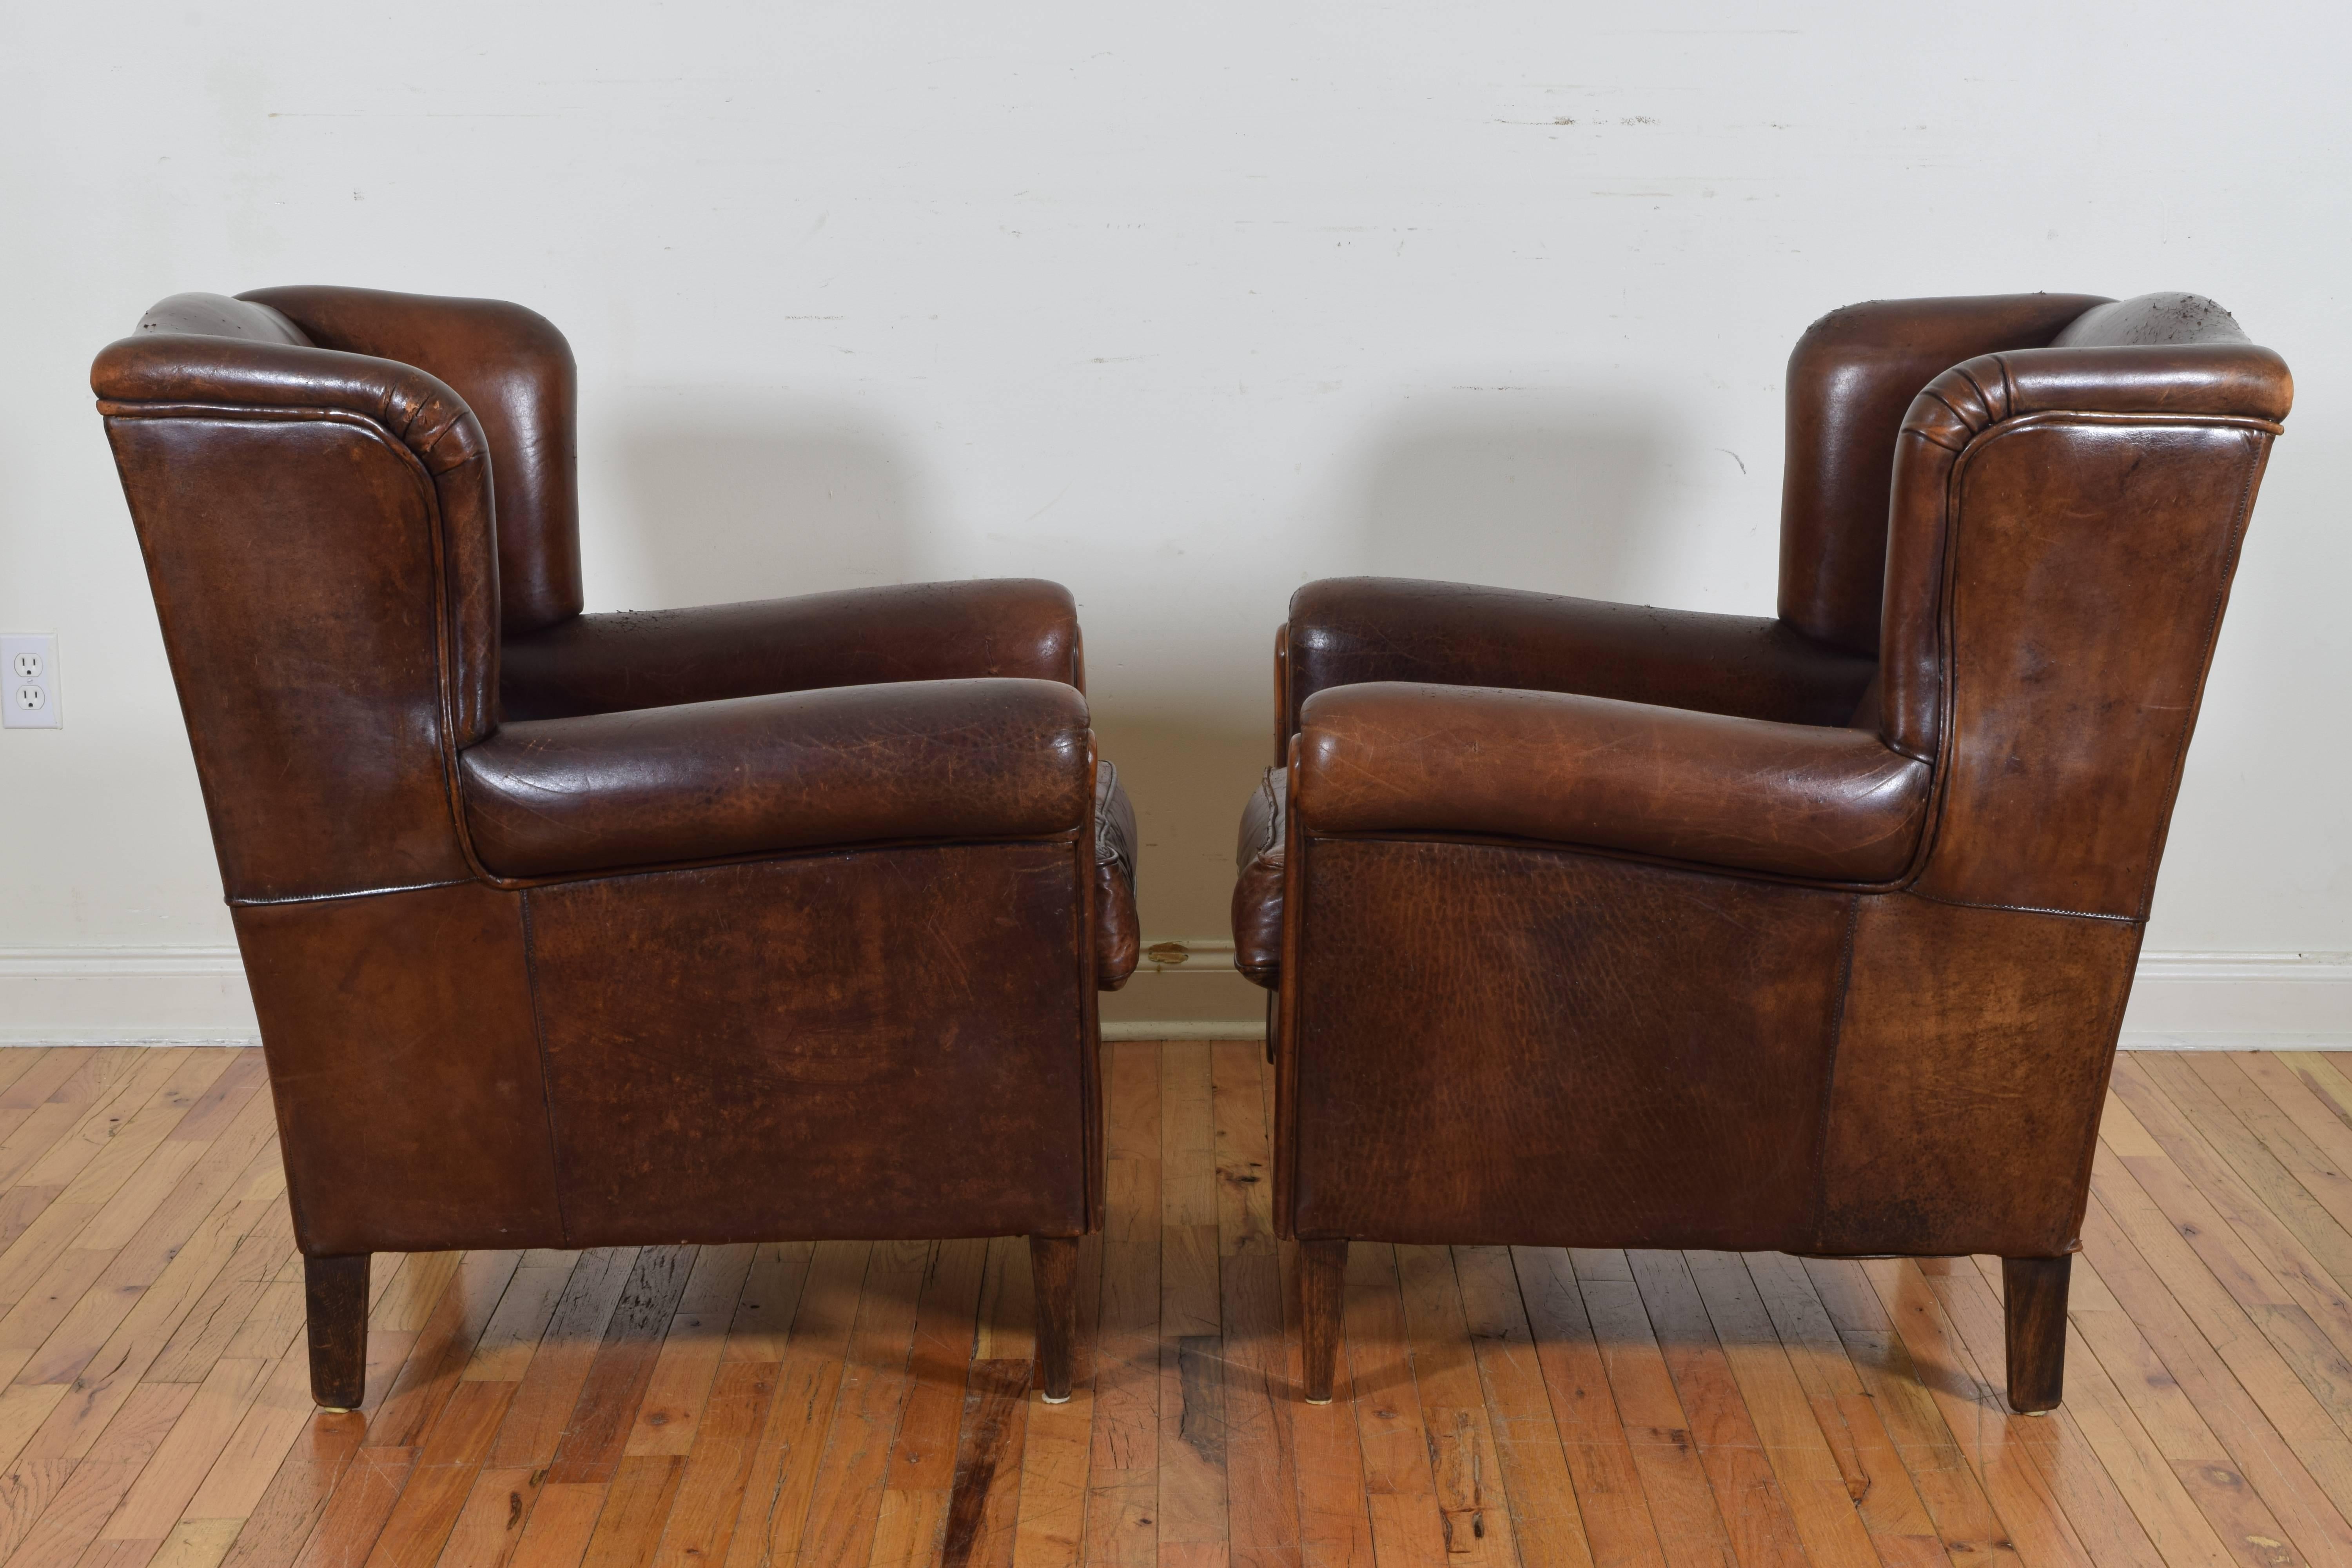 20th Century Pair of English Leather Upholstered Wingchairs with Piping, circa 1940s